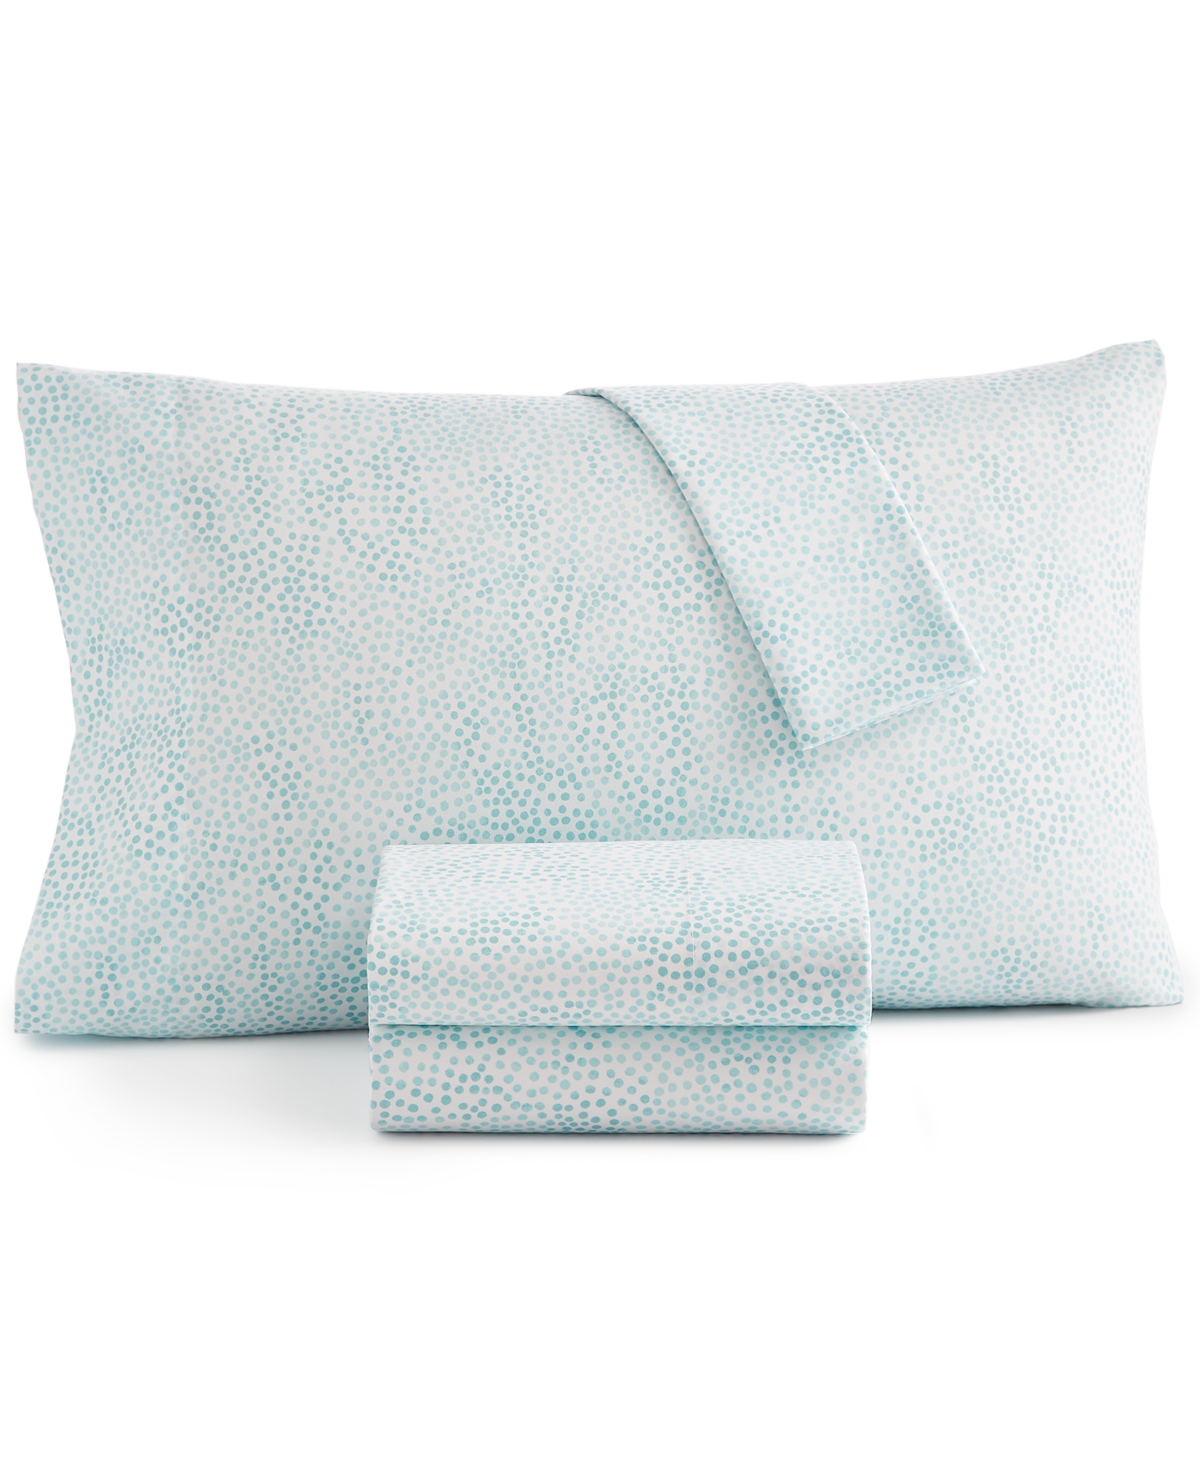 Home Design Easy Care Printed Microfiber 4-pc. Sheet Set, Full, Created For Macy's In Aqua Dots